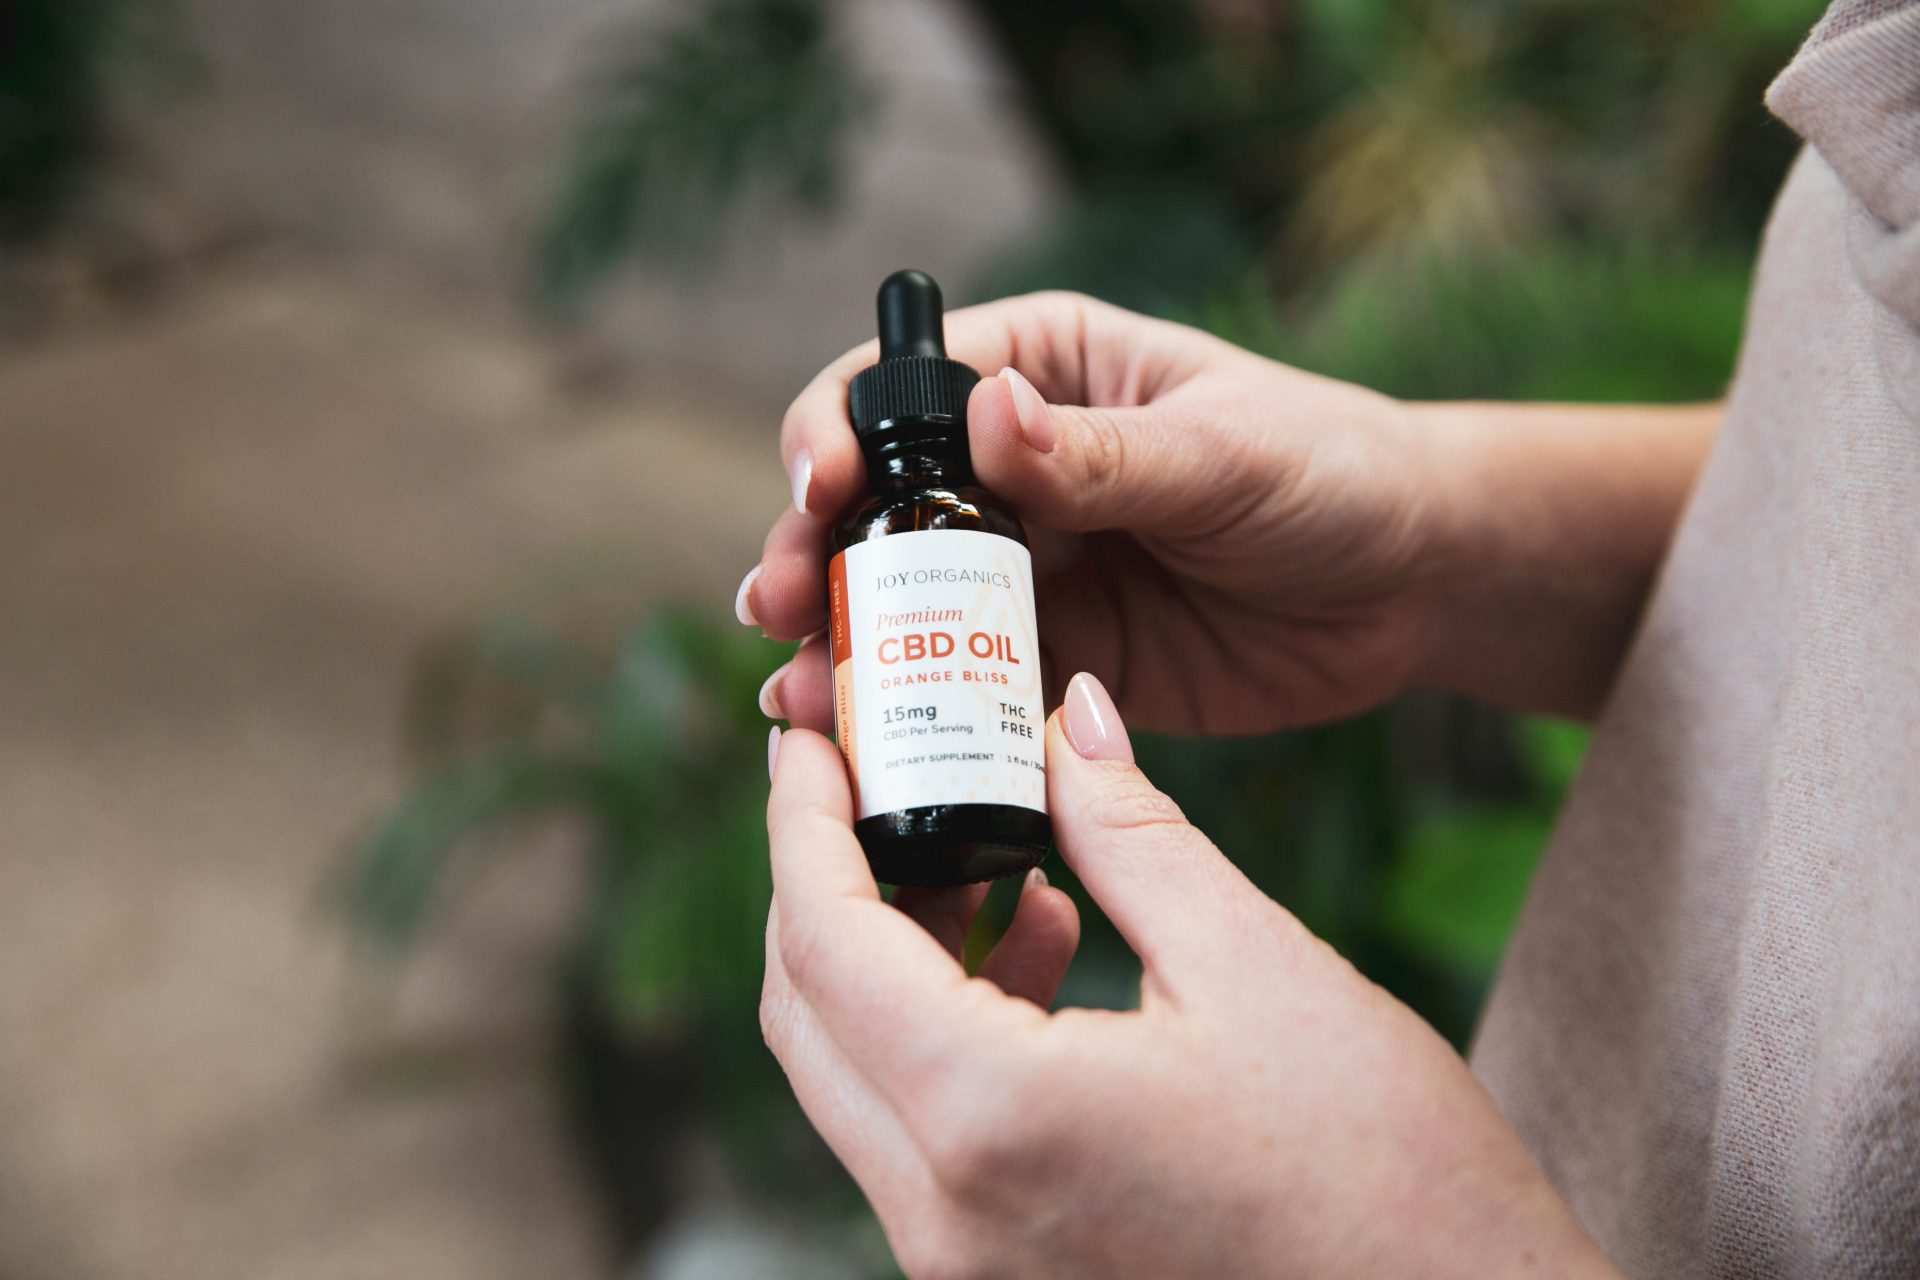 Why You Should Make CBD Oil a Part of Your Daily Routine